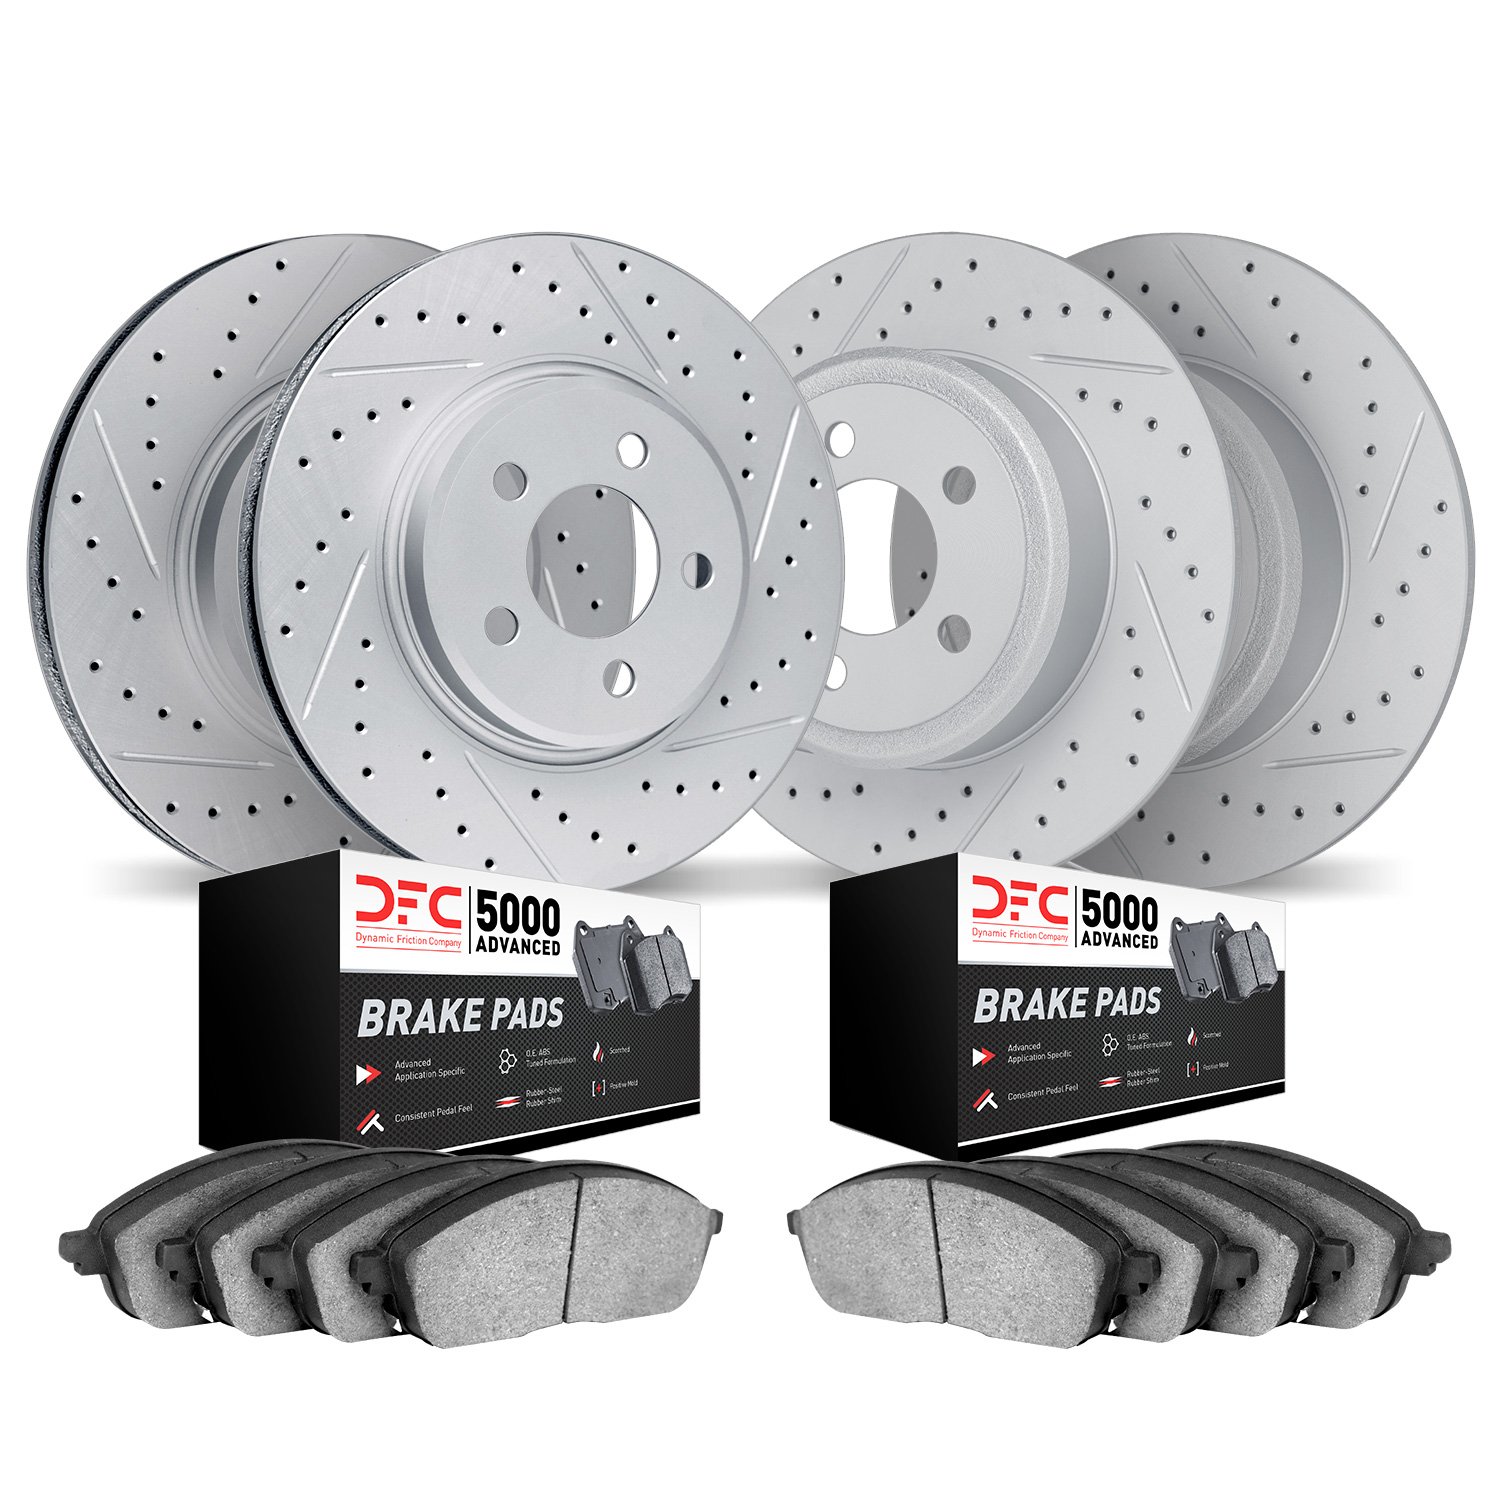 2504-58002 Geoperformance Drilled/Slotted Rotors w/5000 Advanced Brake Pads Kit, 2015-2020 Acura/Honda, Position: Front and Rear